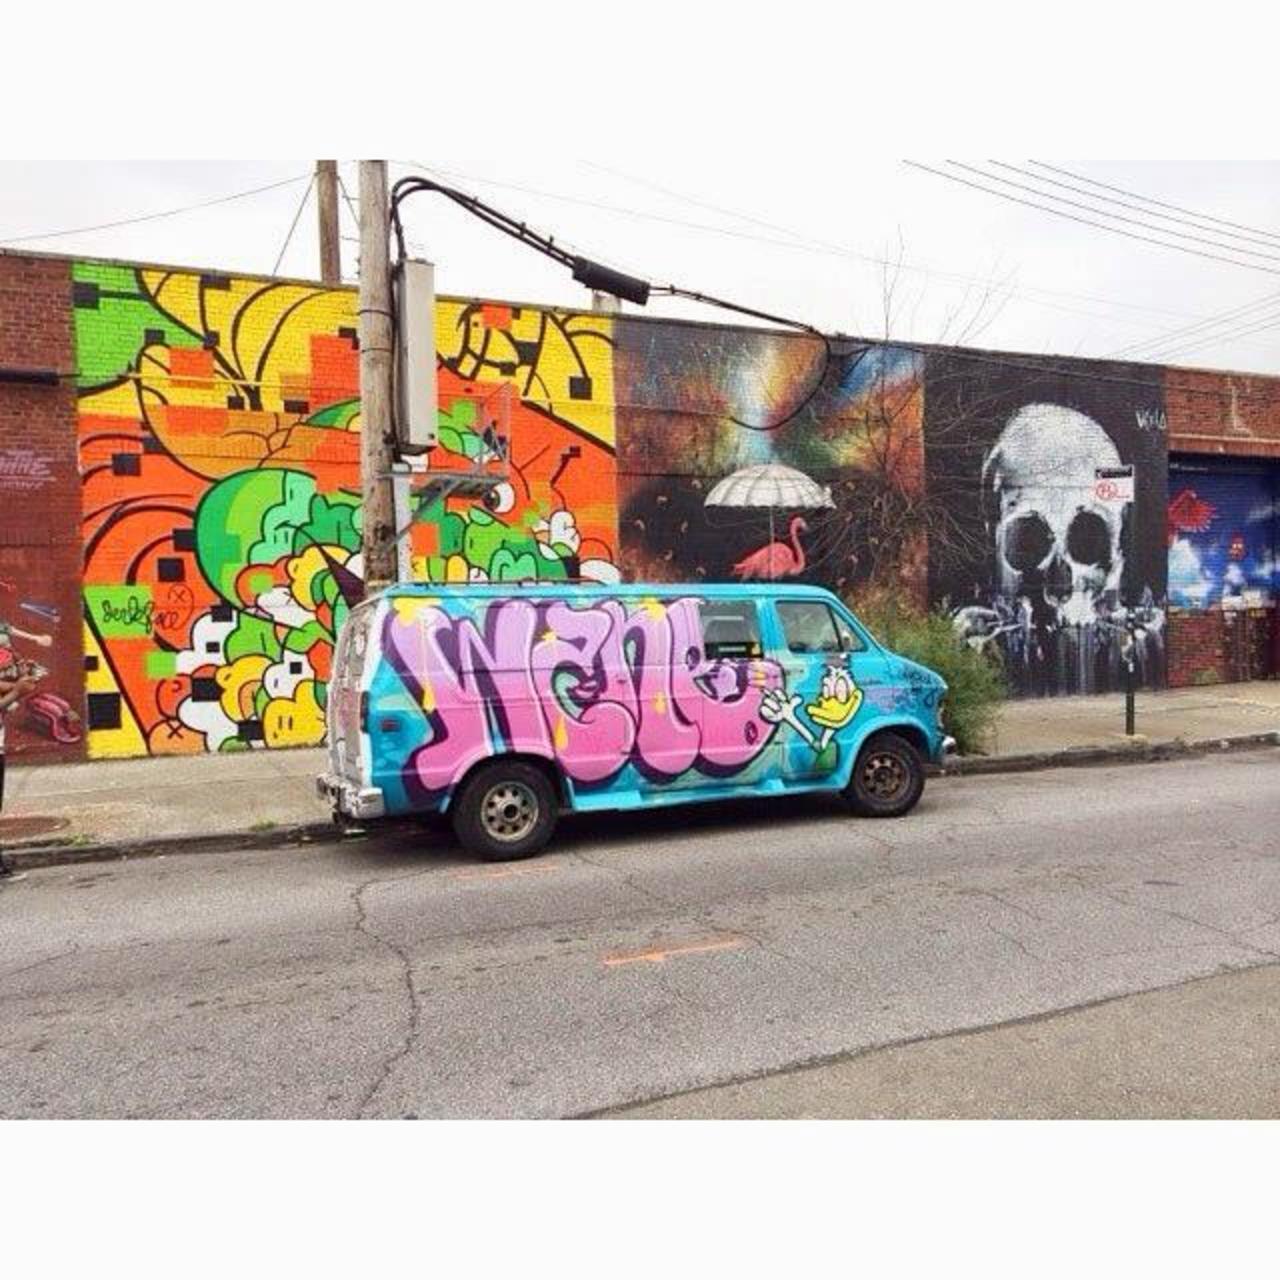 I saw this van in #brooklyn . Does anyone know of the #artist ? #streetart #graffiti http://t.co/Yz7bw3JKrO